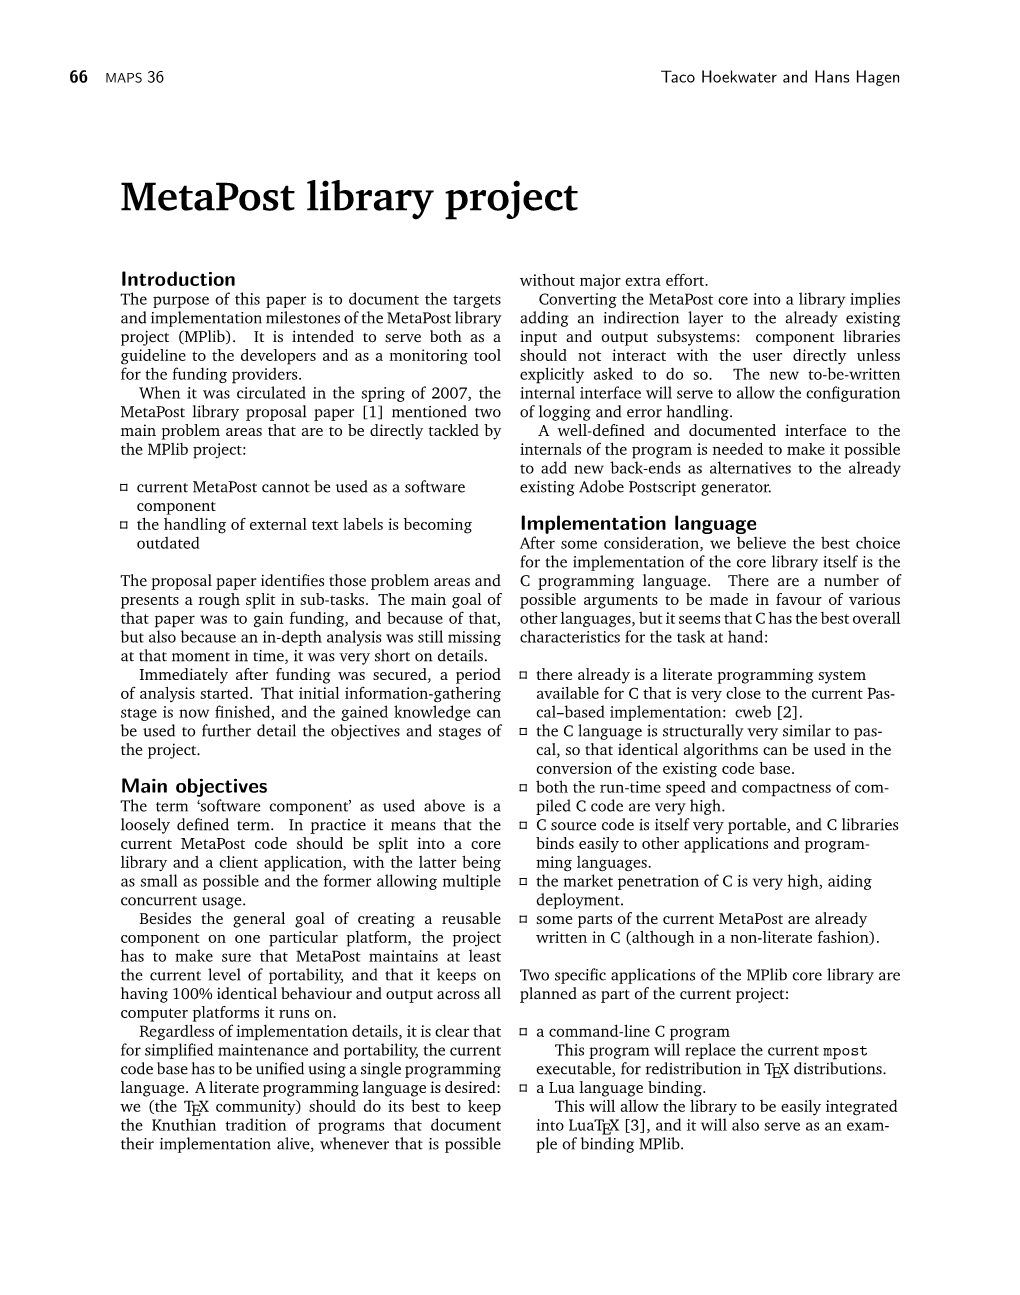 Metapost Library Project